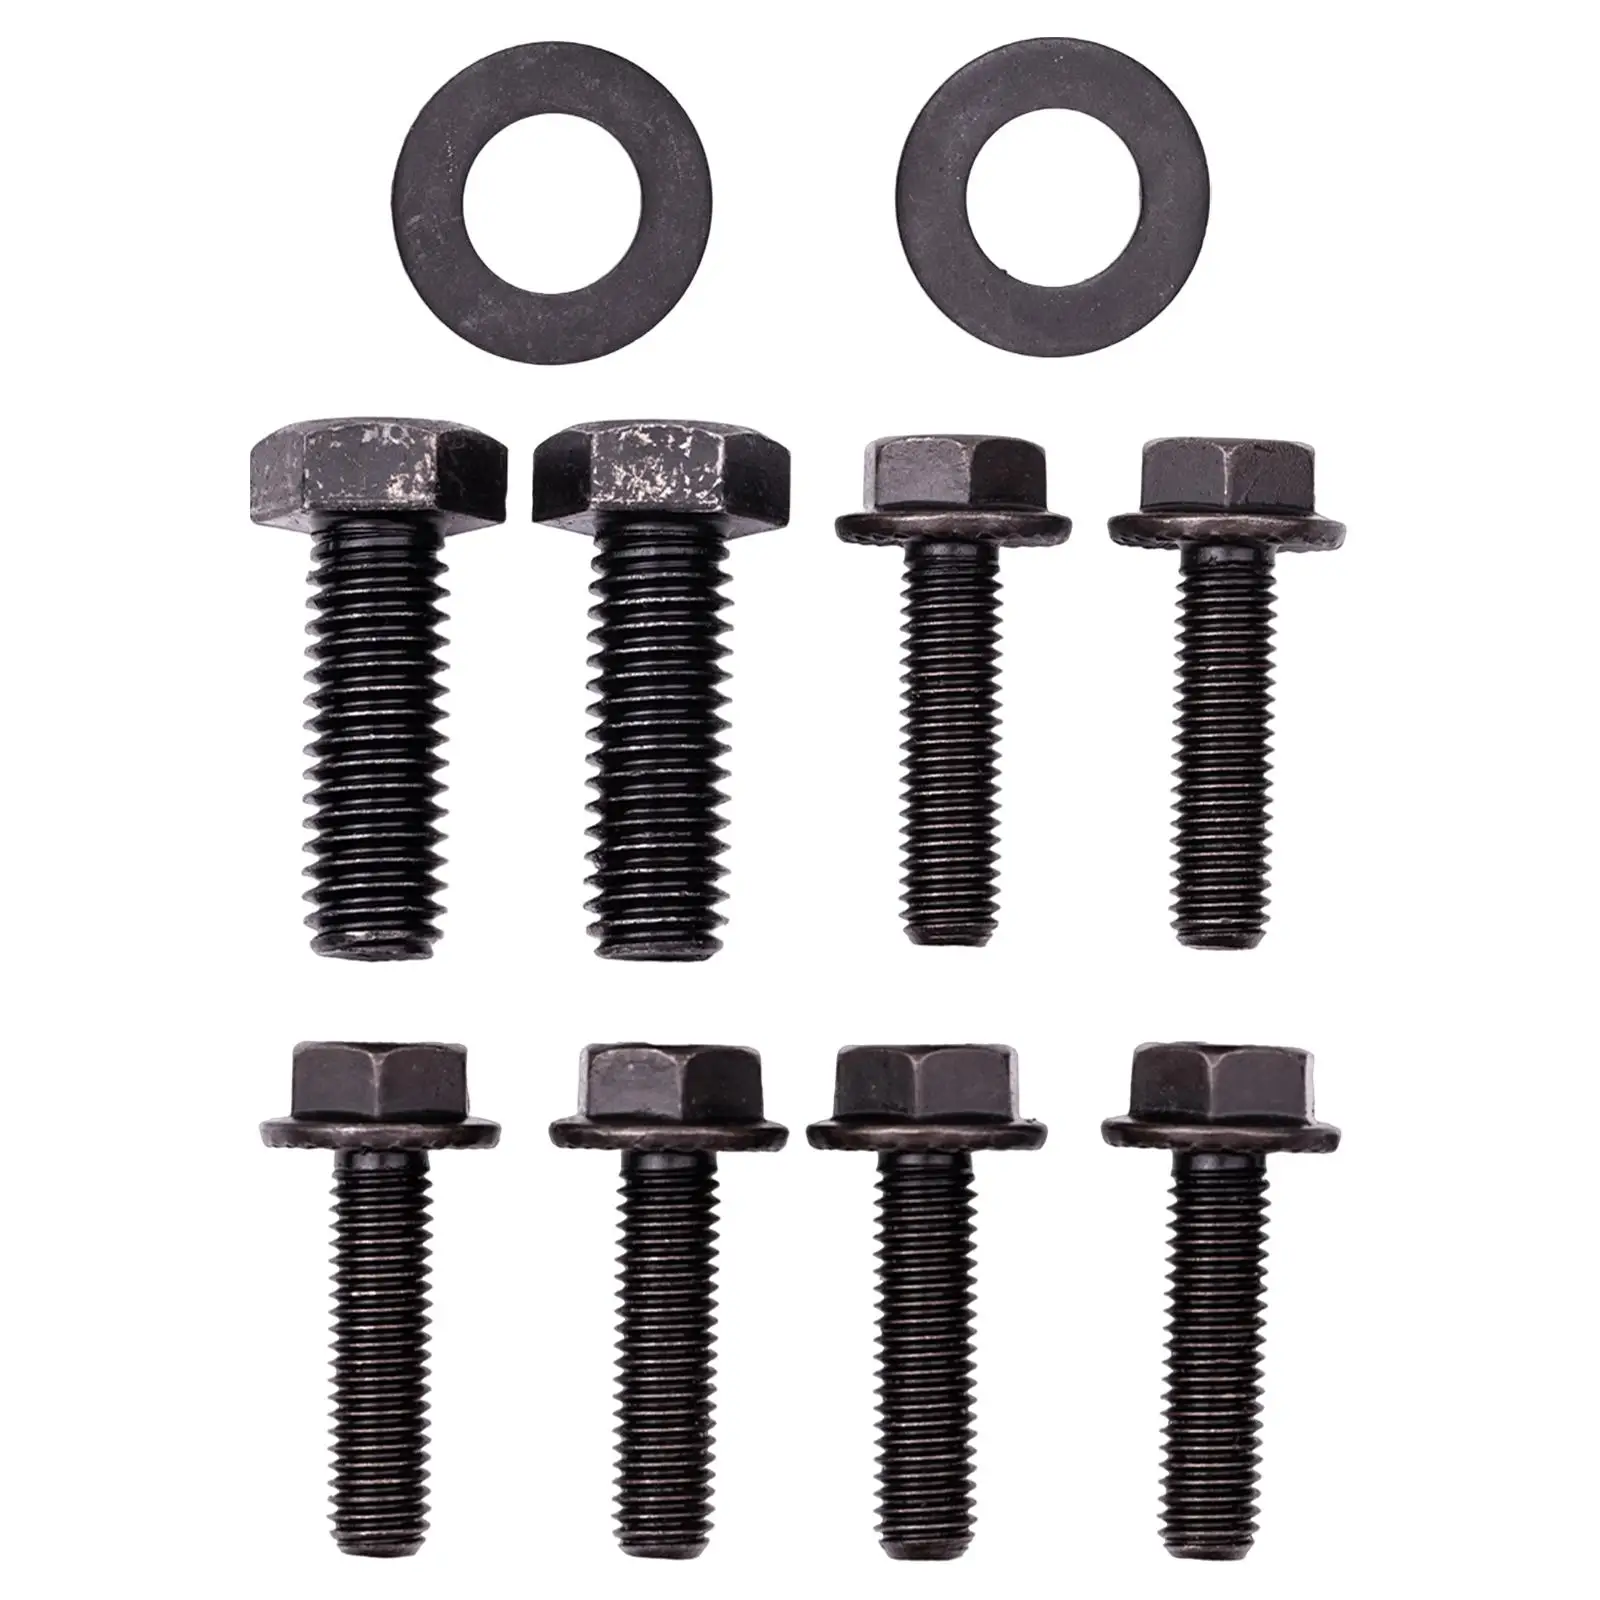 Front Seat Mounting Bolts Fittings Heavy Duty Direct Replaces Vehicle Driver and Passenger for Jeep Wrangler TJ 1997-2006